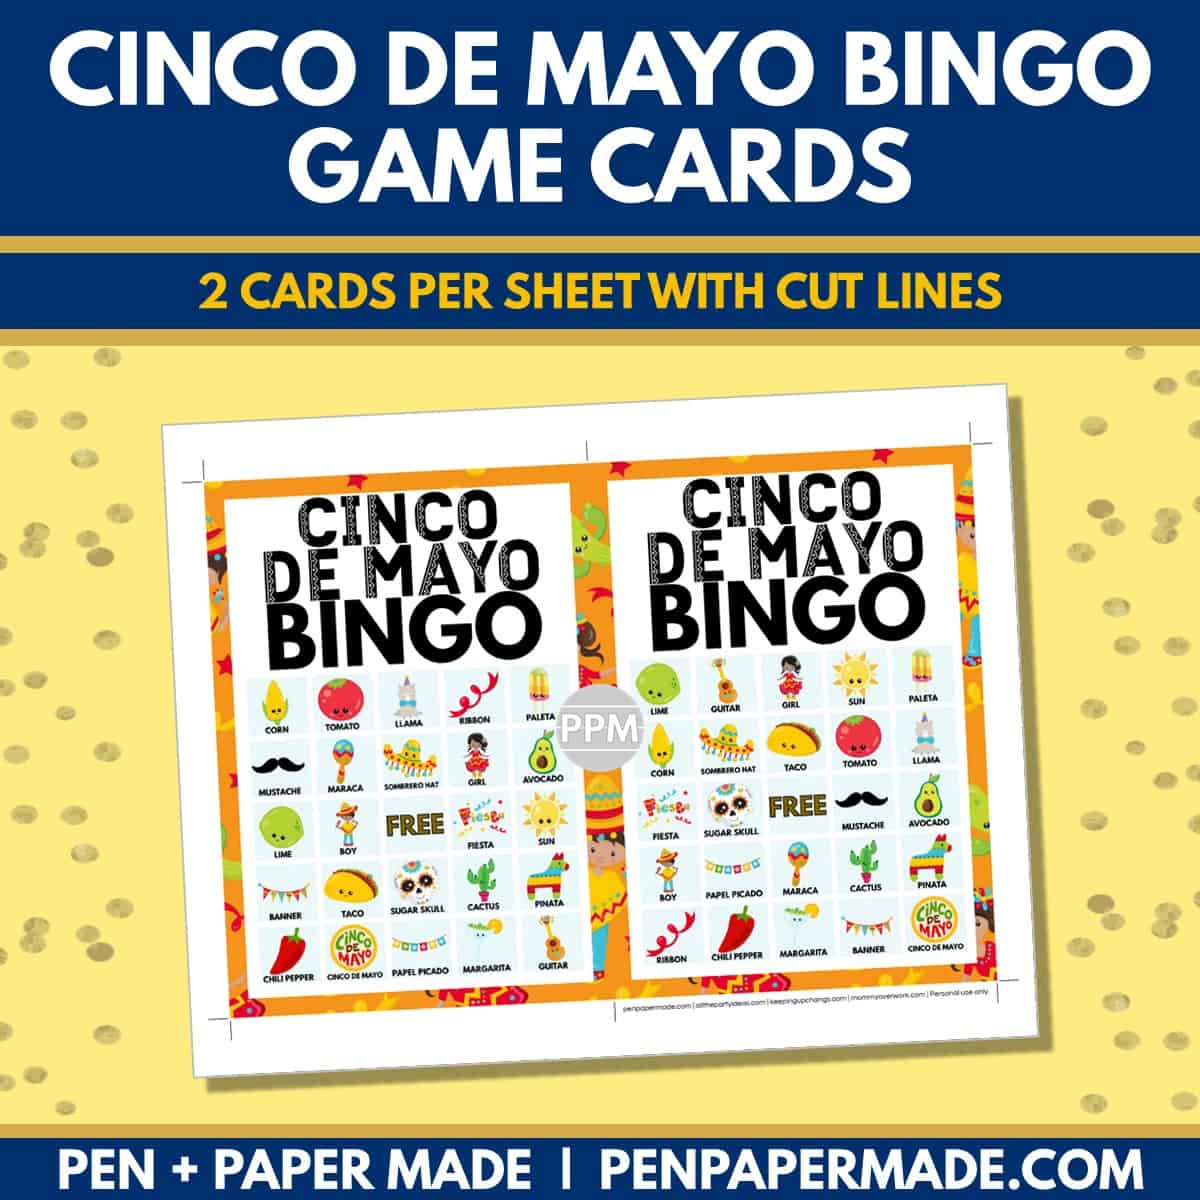 cinco de mayo bingo card 5x5 5x7 game boards with images and text words.